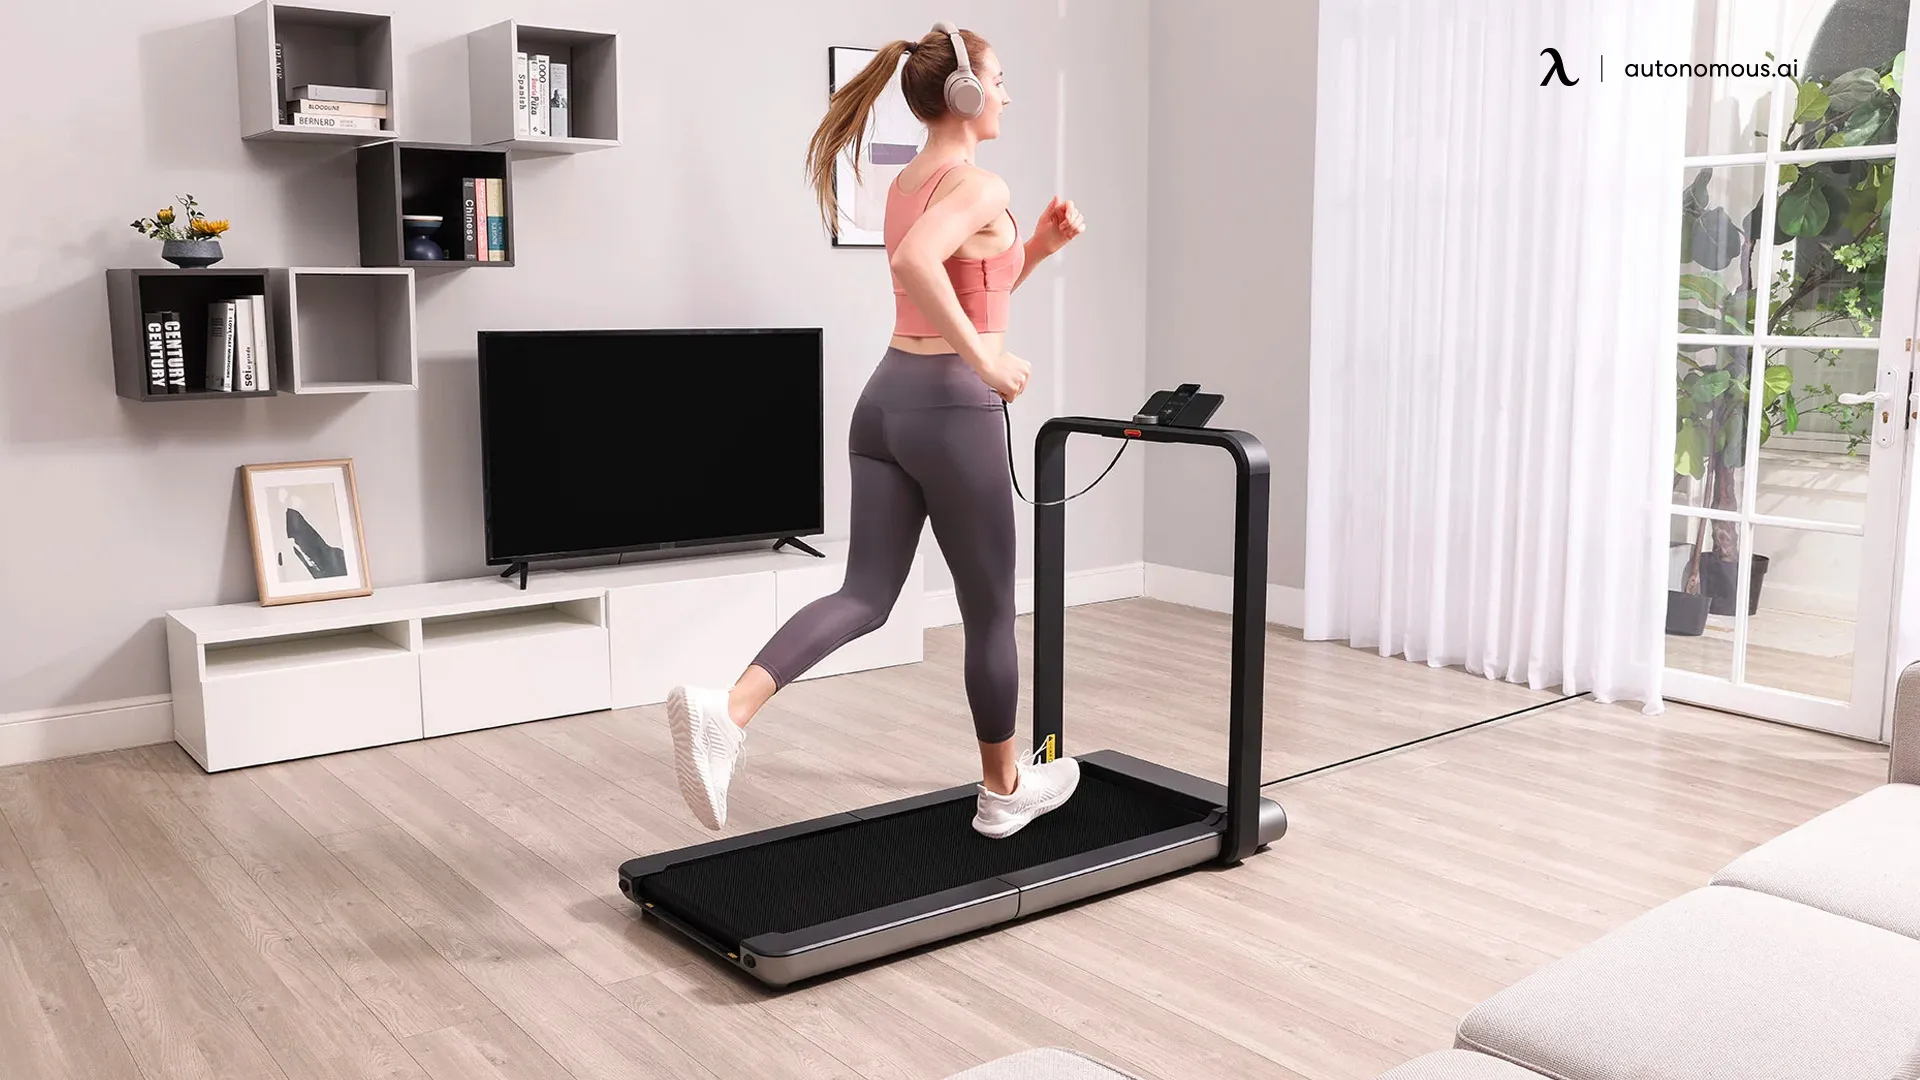 15 Picks of The Quietest Treadmills & How to Maintain Them